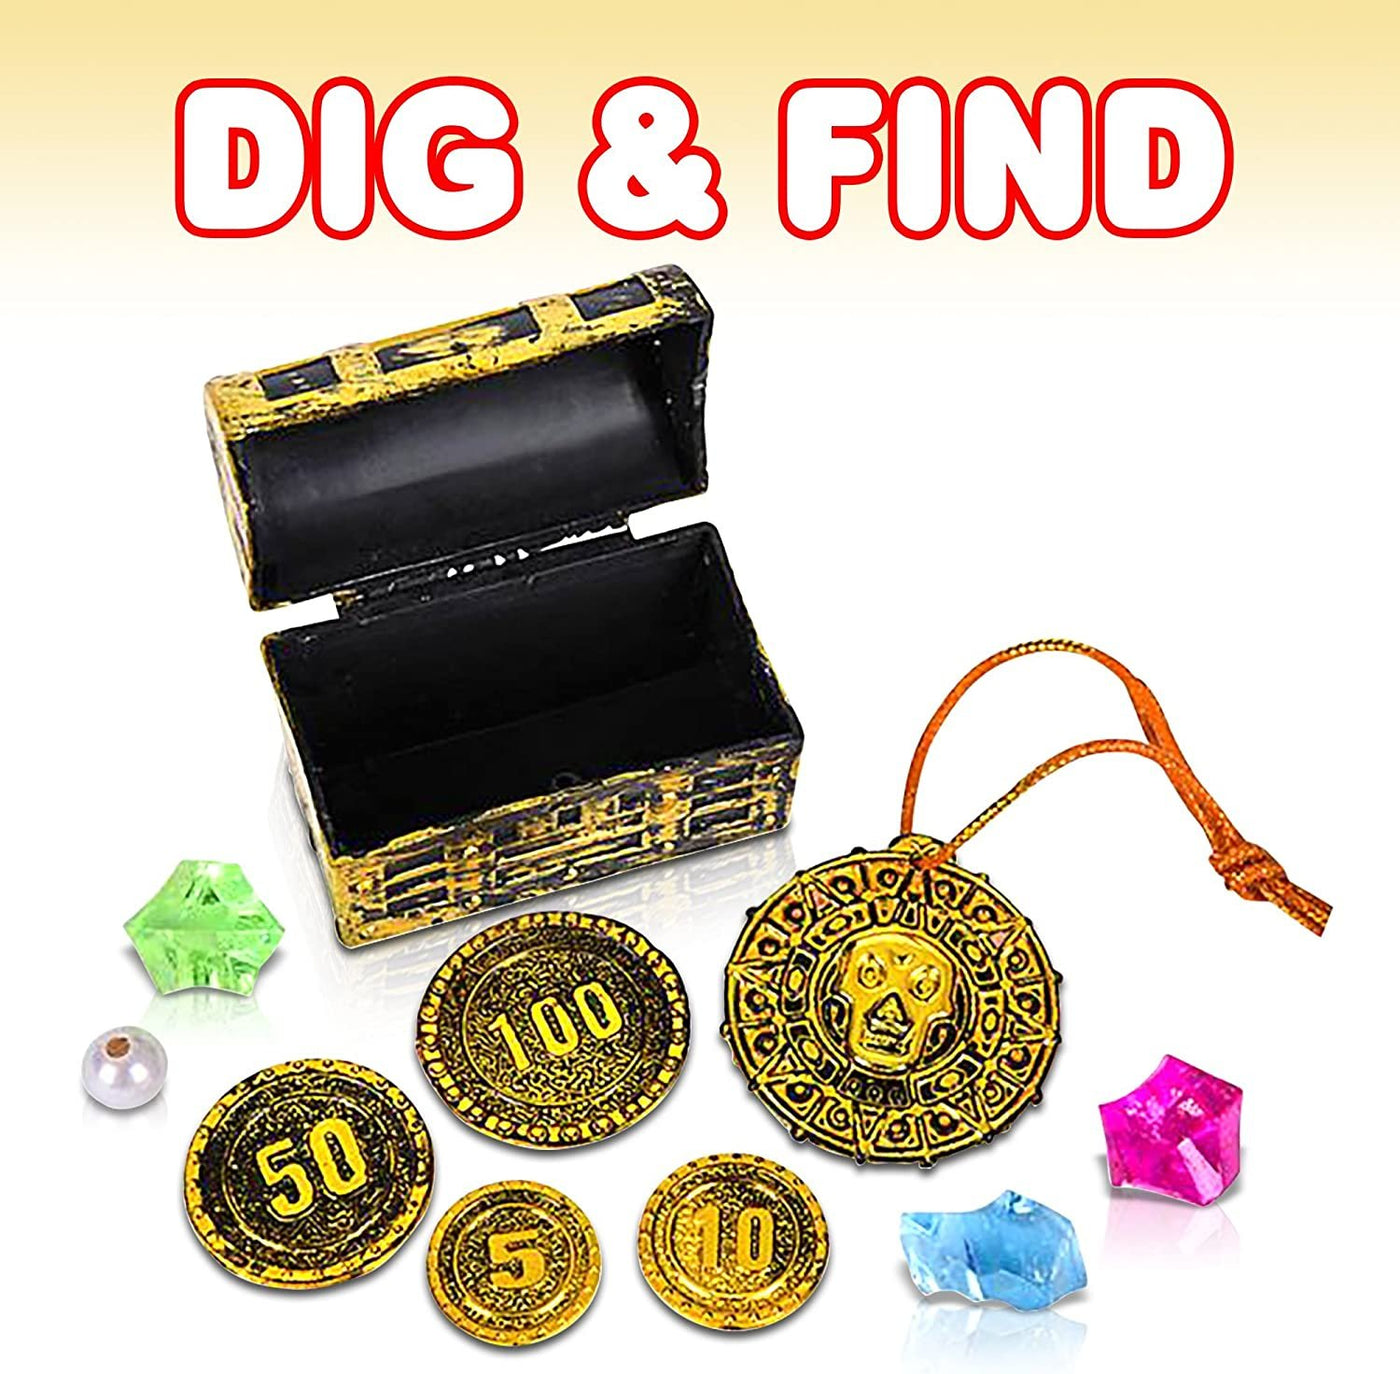 ArtCreativity Pirate Treasure Dig Kit for Kids - Gem Excavation Set with Digging Tools - Interactive Excavating Toys - Great Birthday Gift Idea, Contest Prize for Boys and Girls